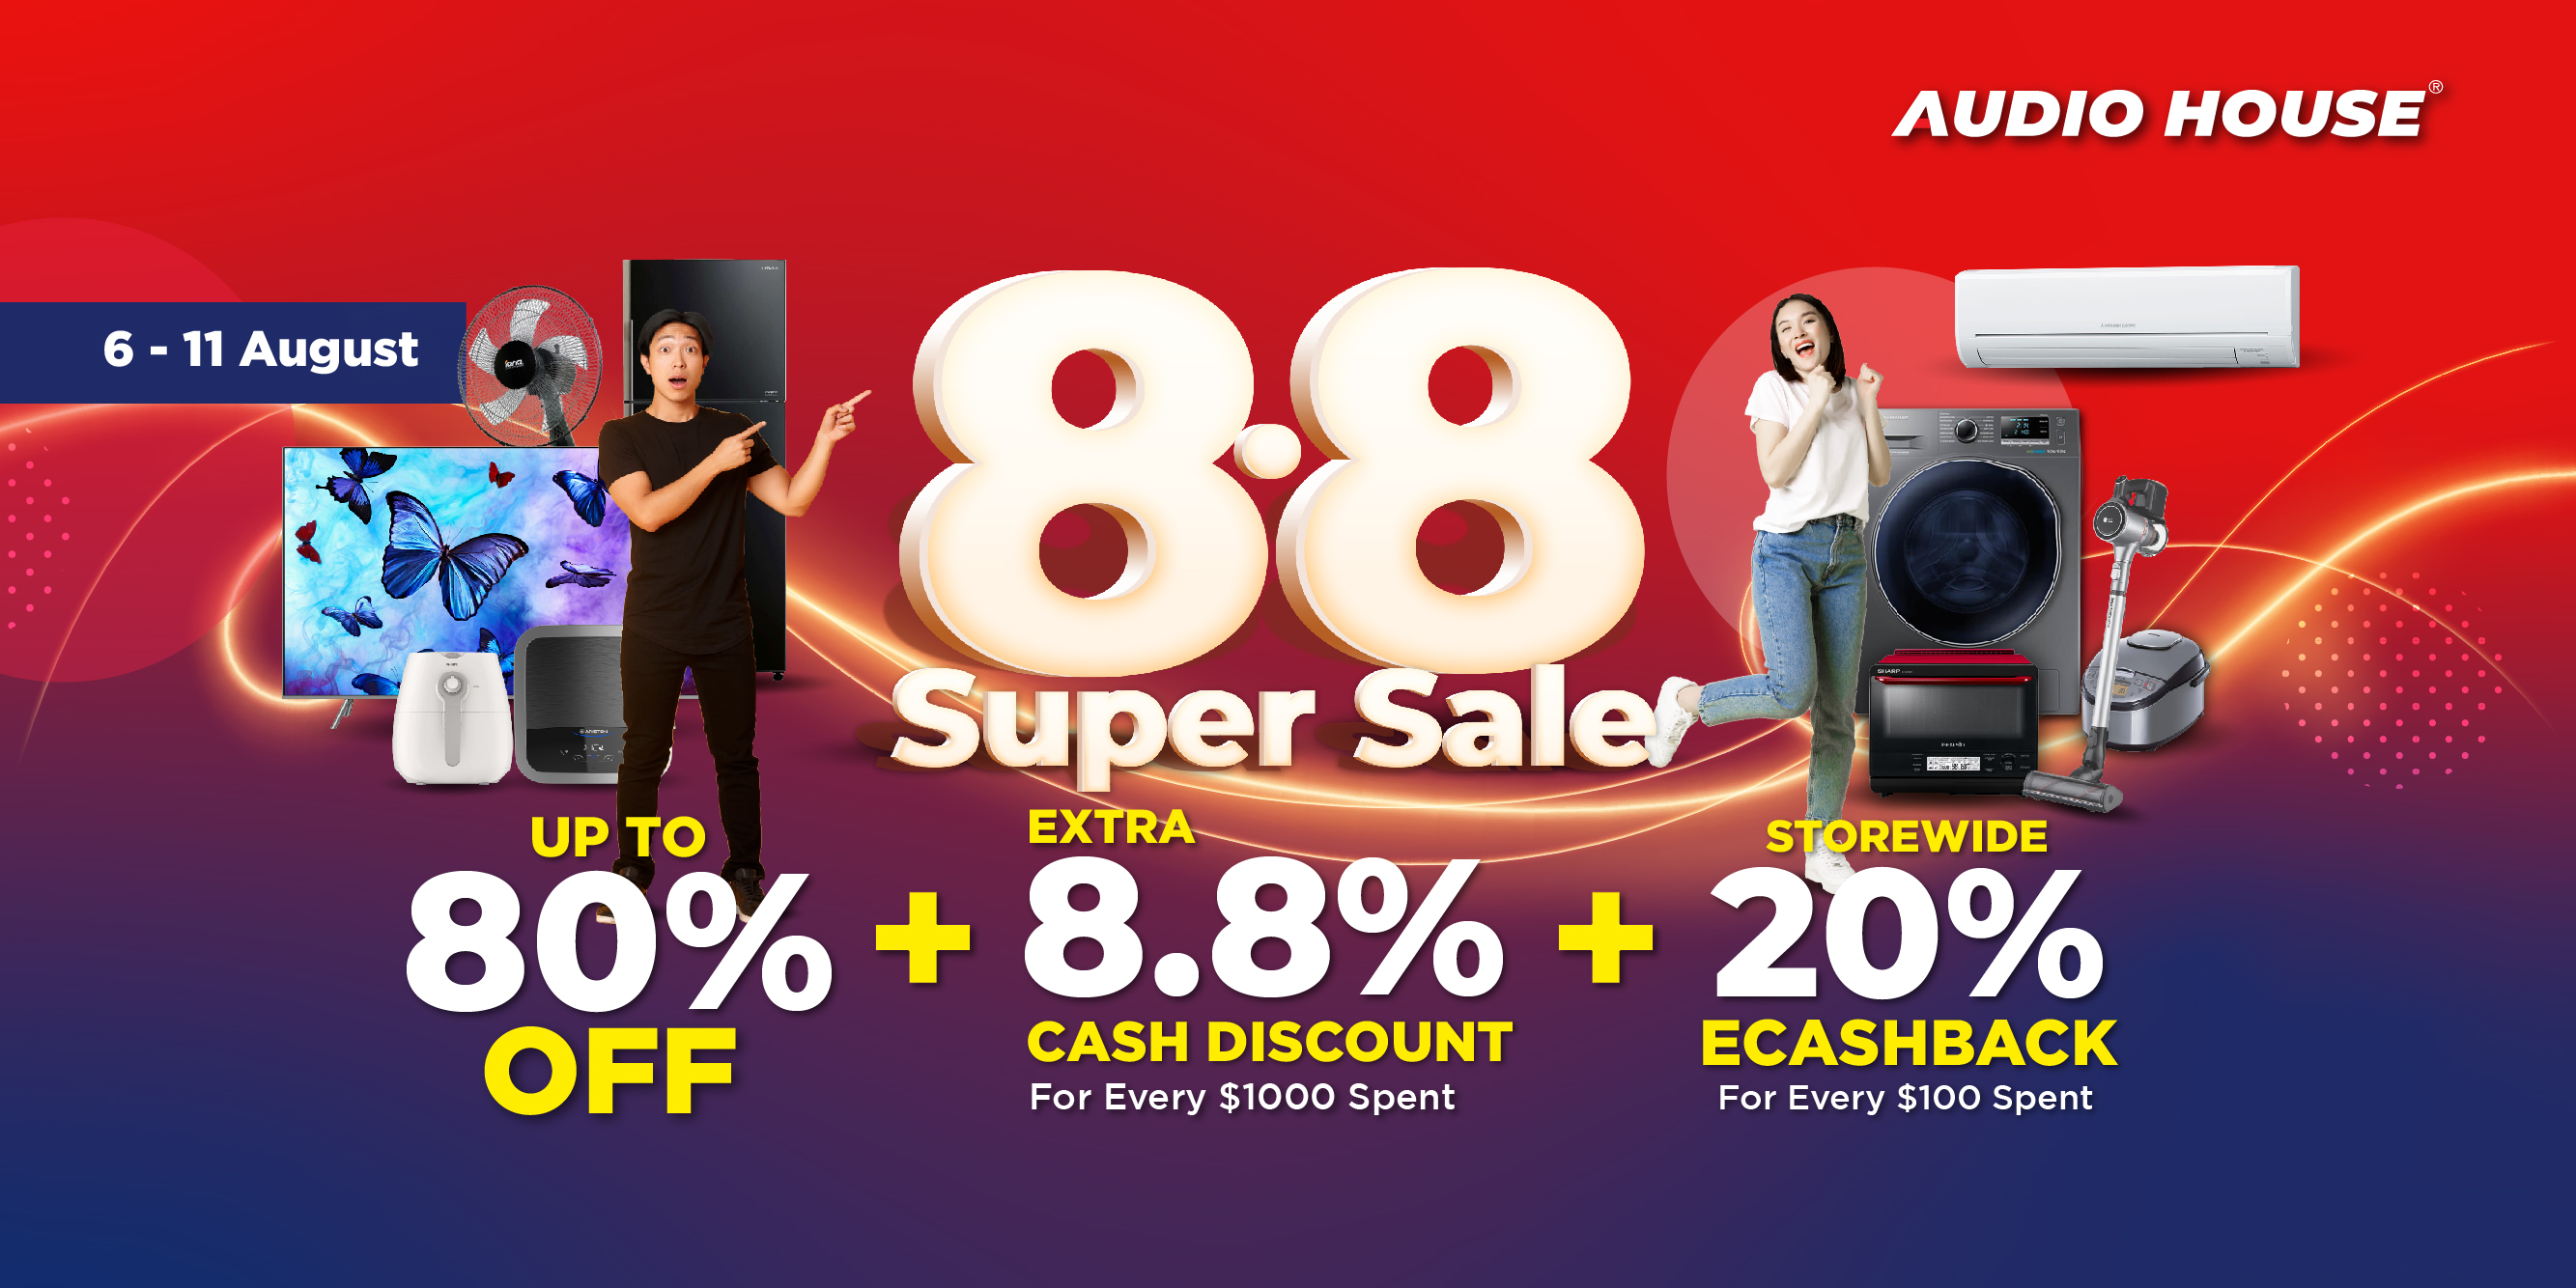 Get Up to 80% OFF + Extra 8.8% Cash Discount* + Storewide 20% eCashback* at Audio House 8.8 Super Sale